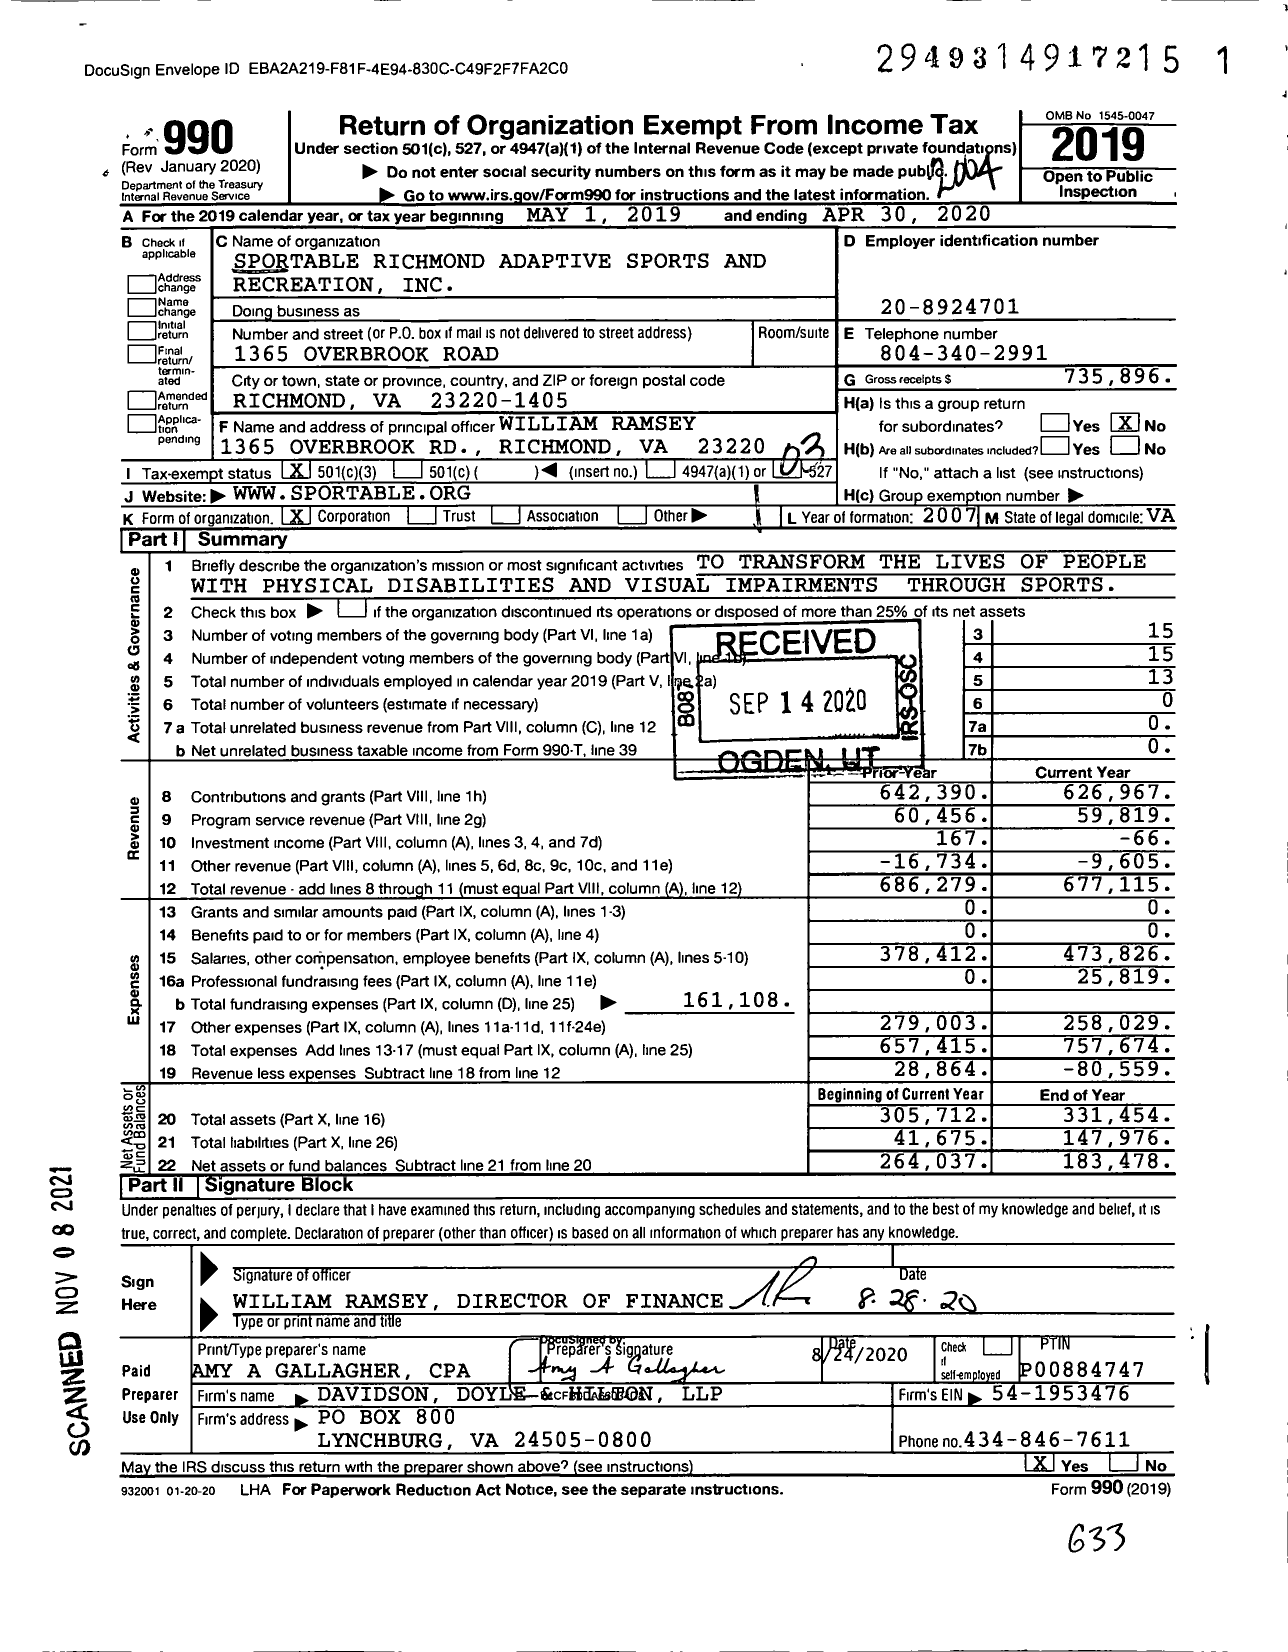 Image of first page of 2019 Form 990 for Sportable Richmond Adaptive Sports and Recreation